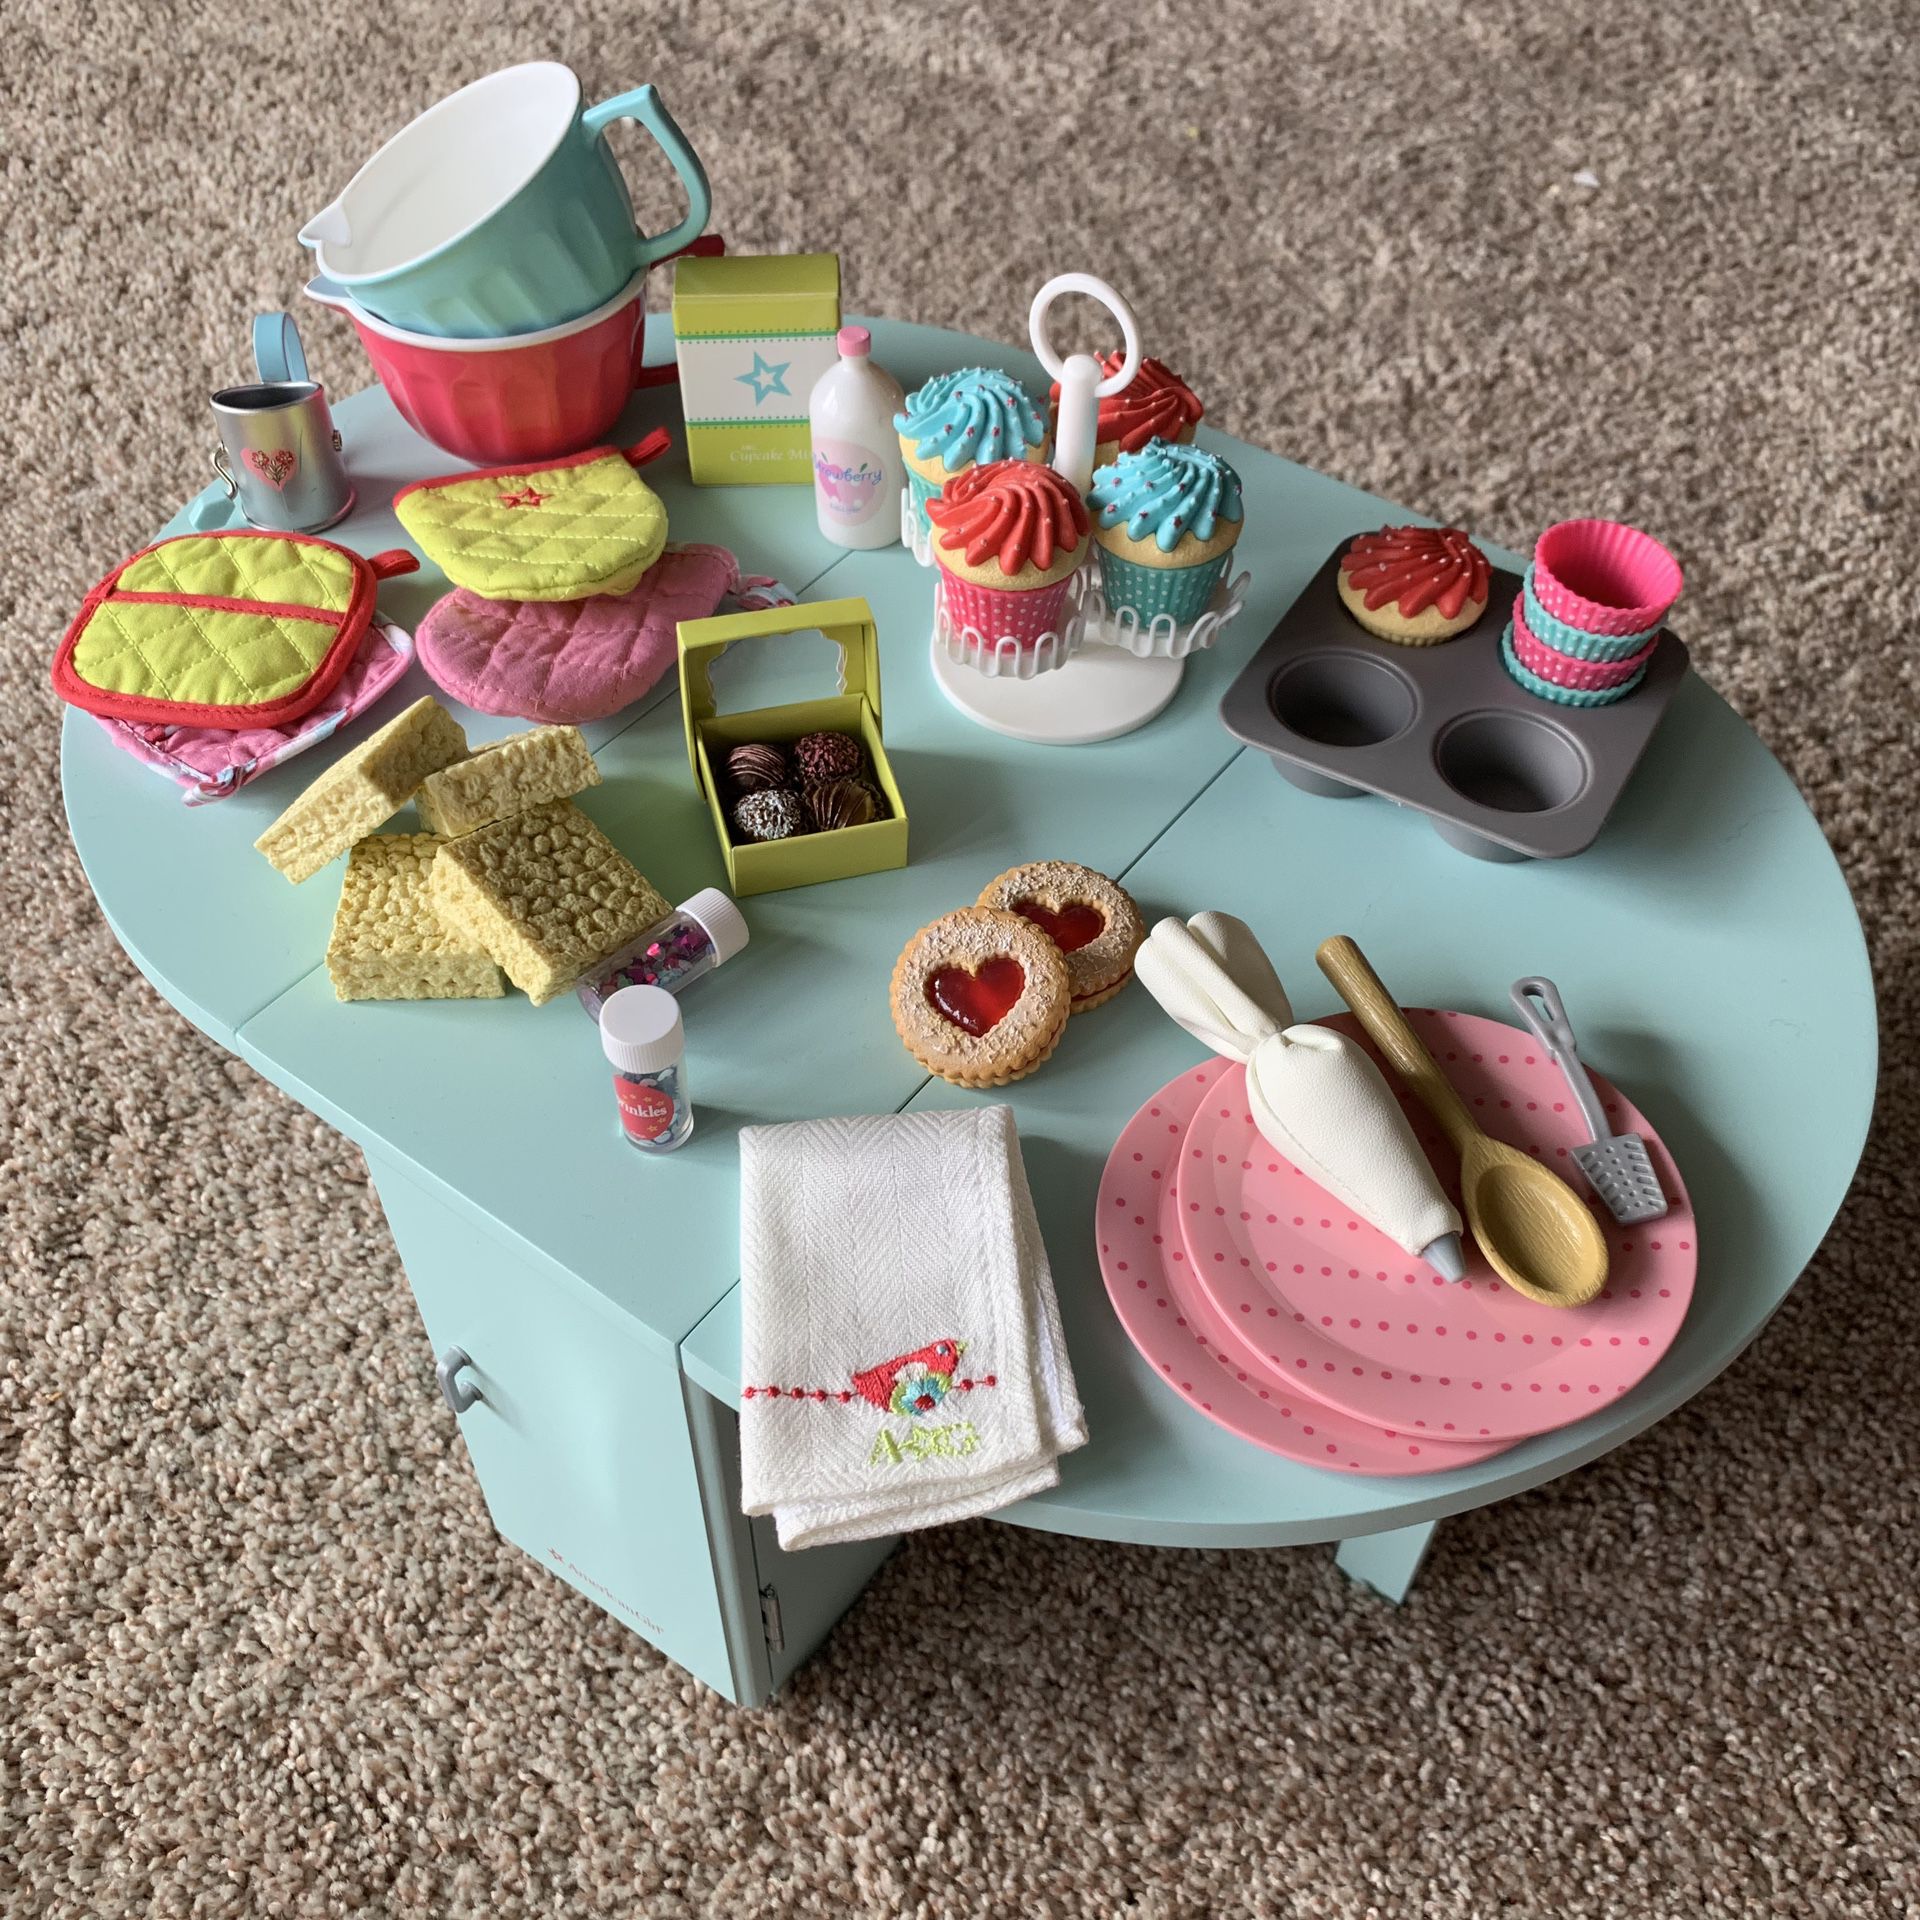 American Girl Baking Table And Treats